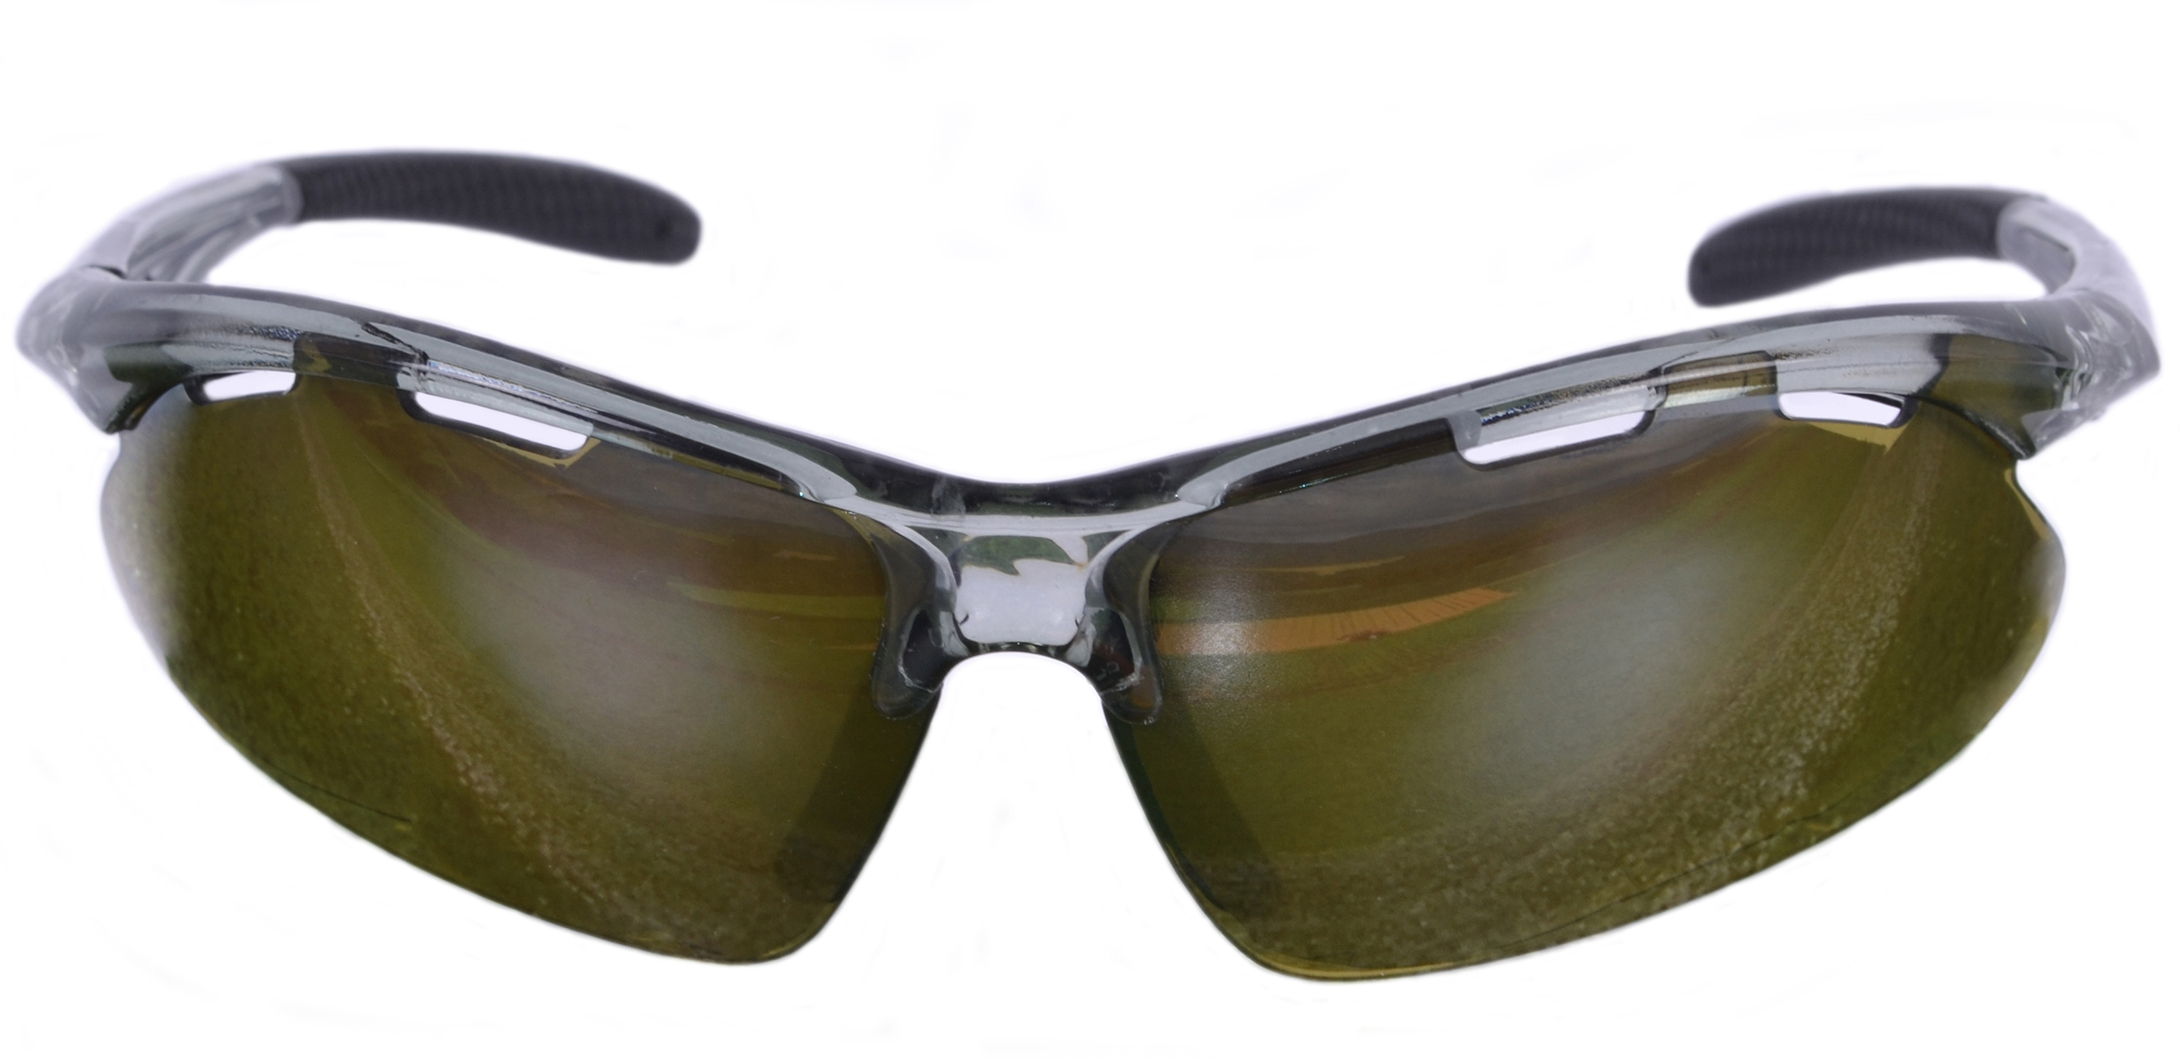 Fore polarised golf sunglasses with green mirror lenses